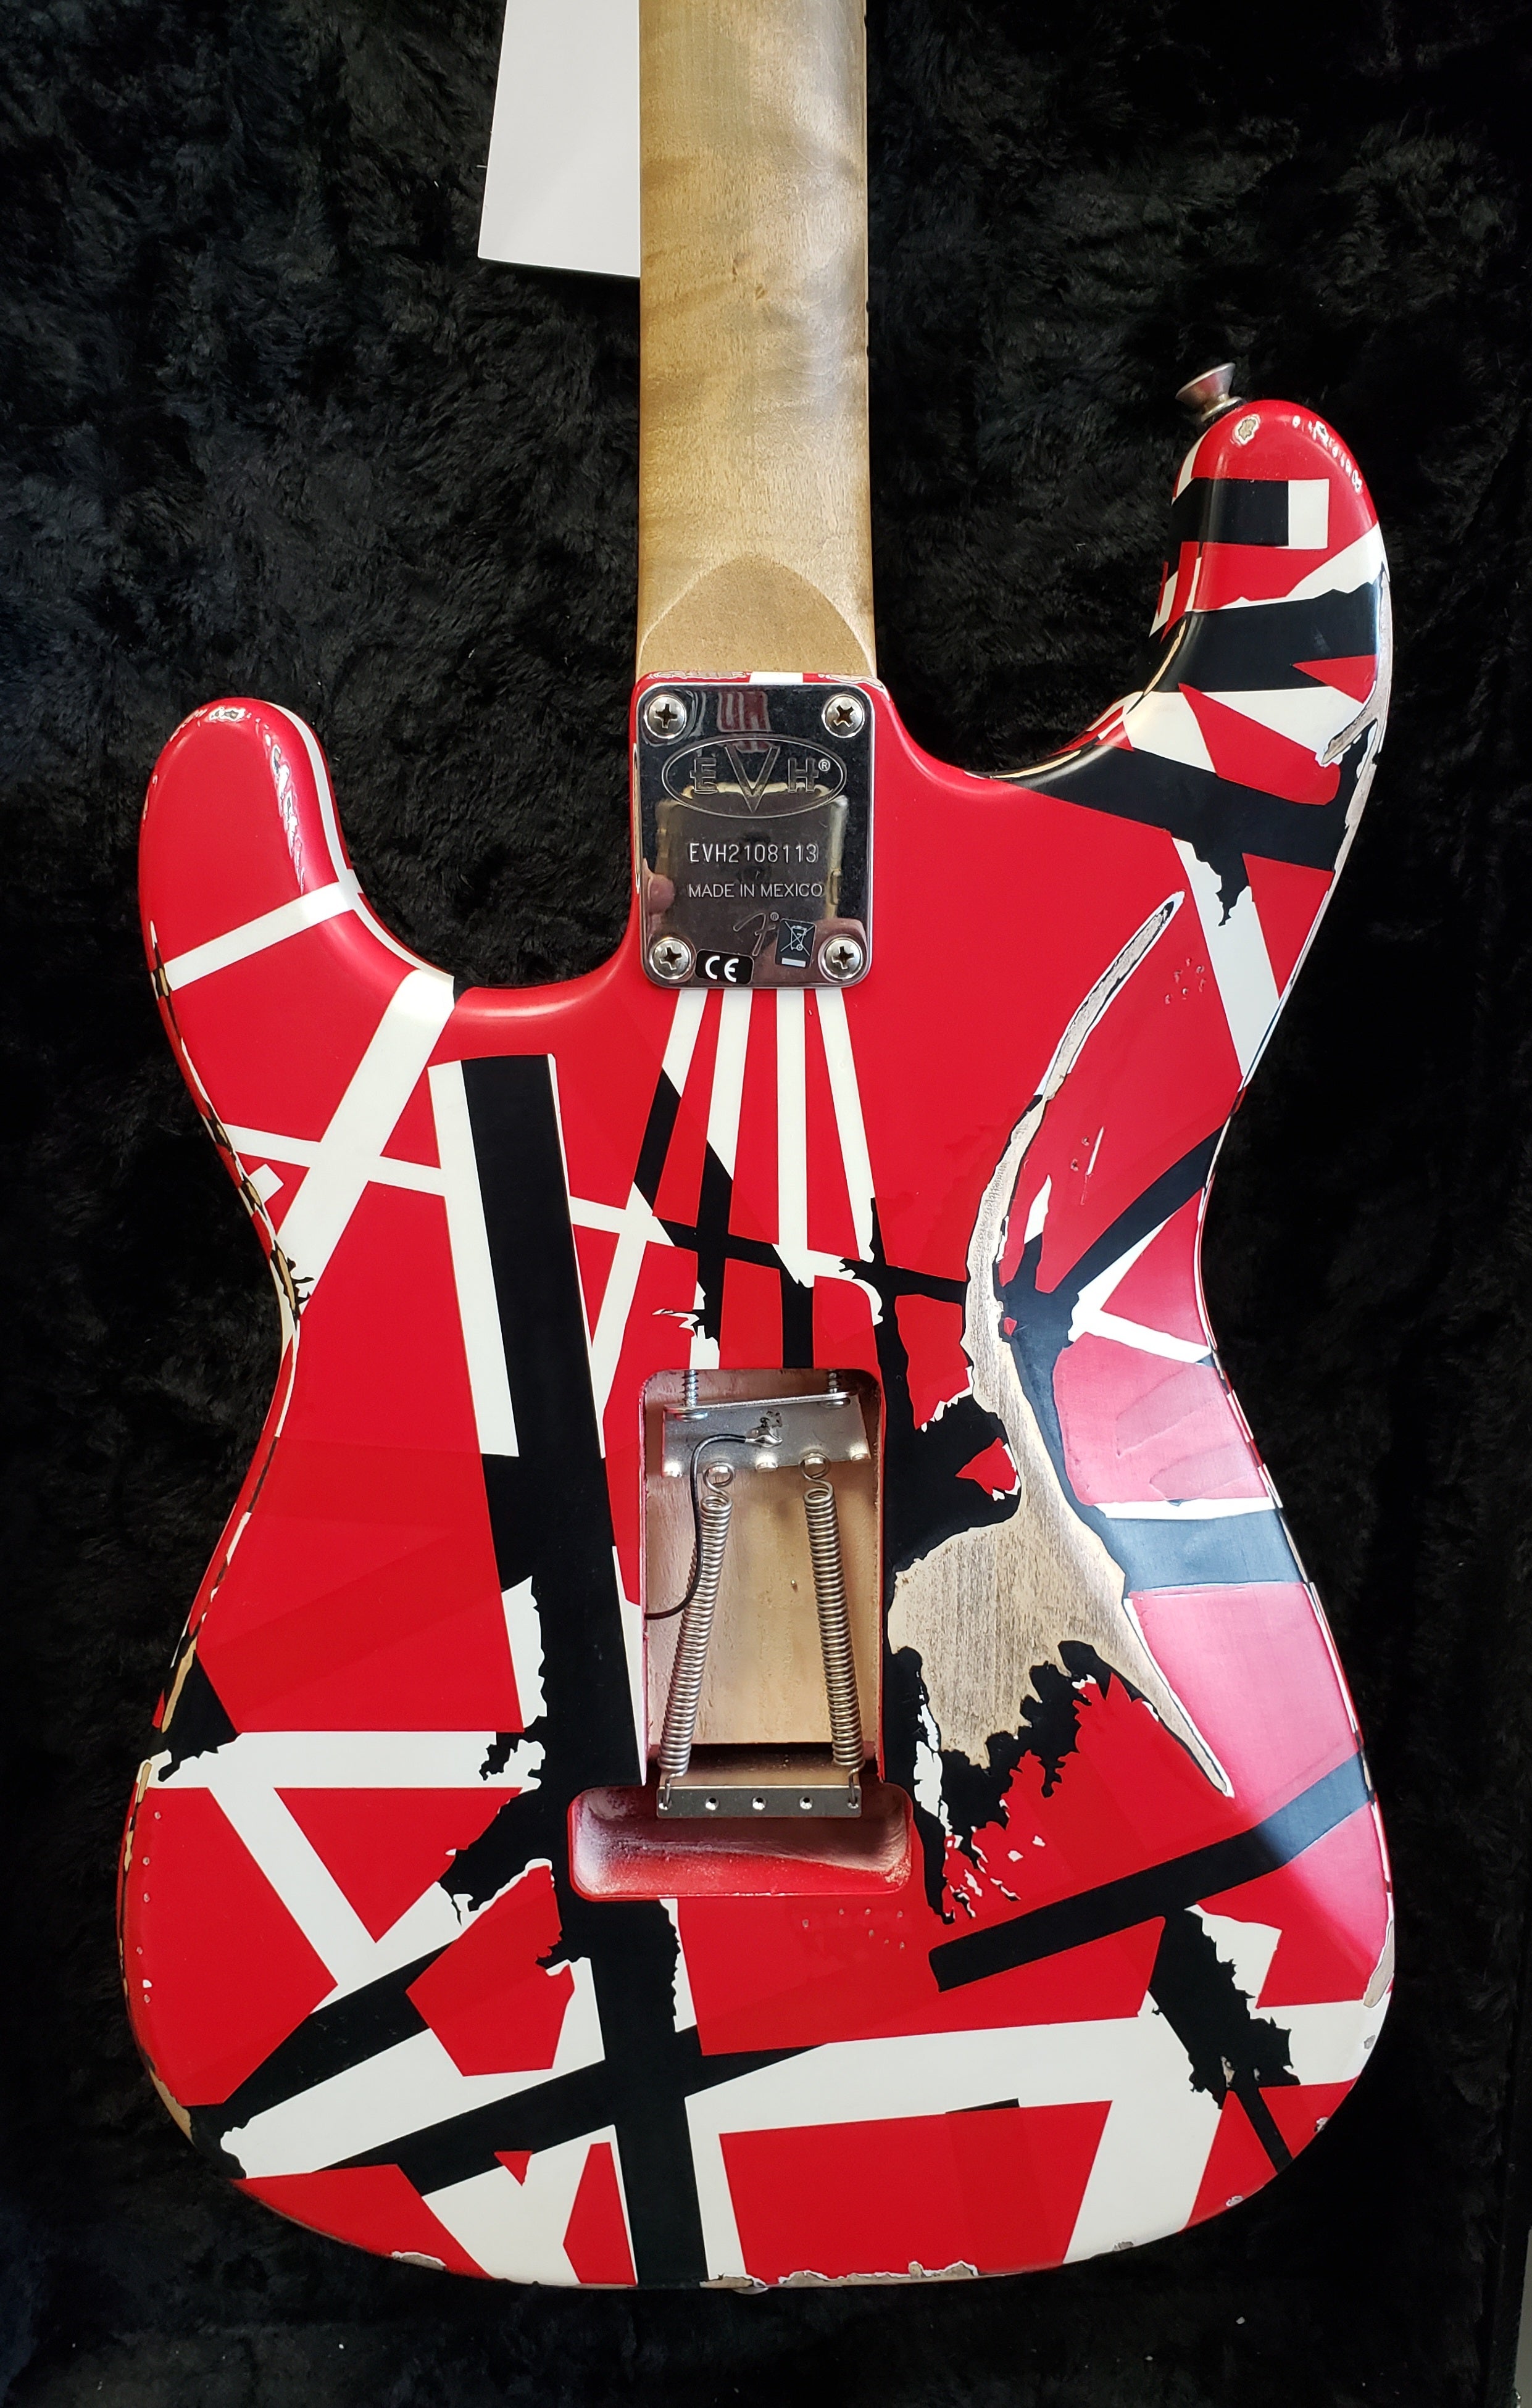 EVH Striped Series Frankie Red - White - Black Relic 5107900503 SERIAL NUMBER EVH2108113 7.2 LBS USED SPECIAL